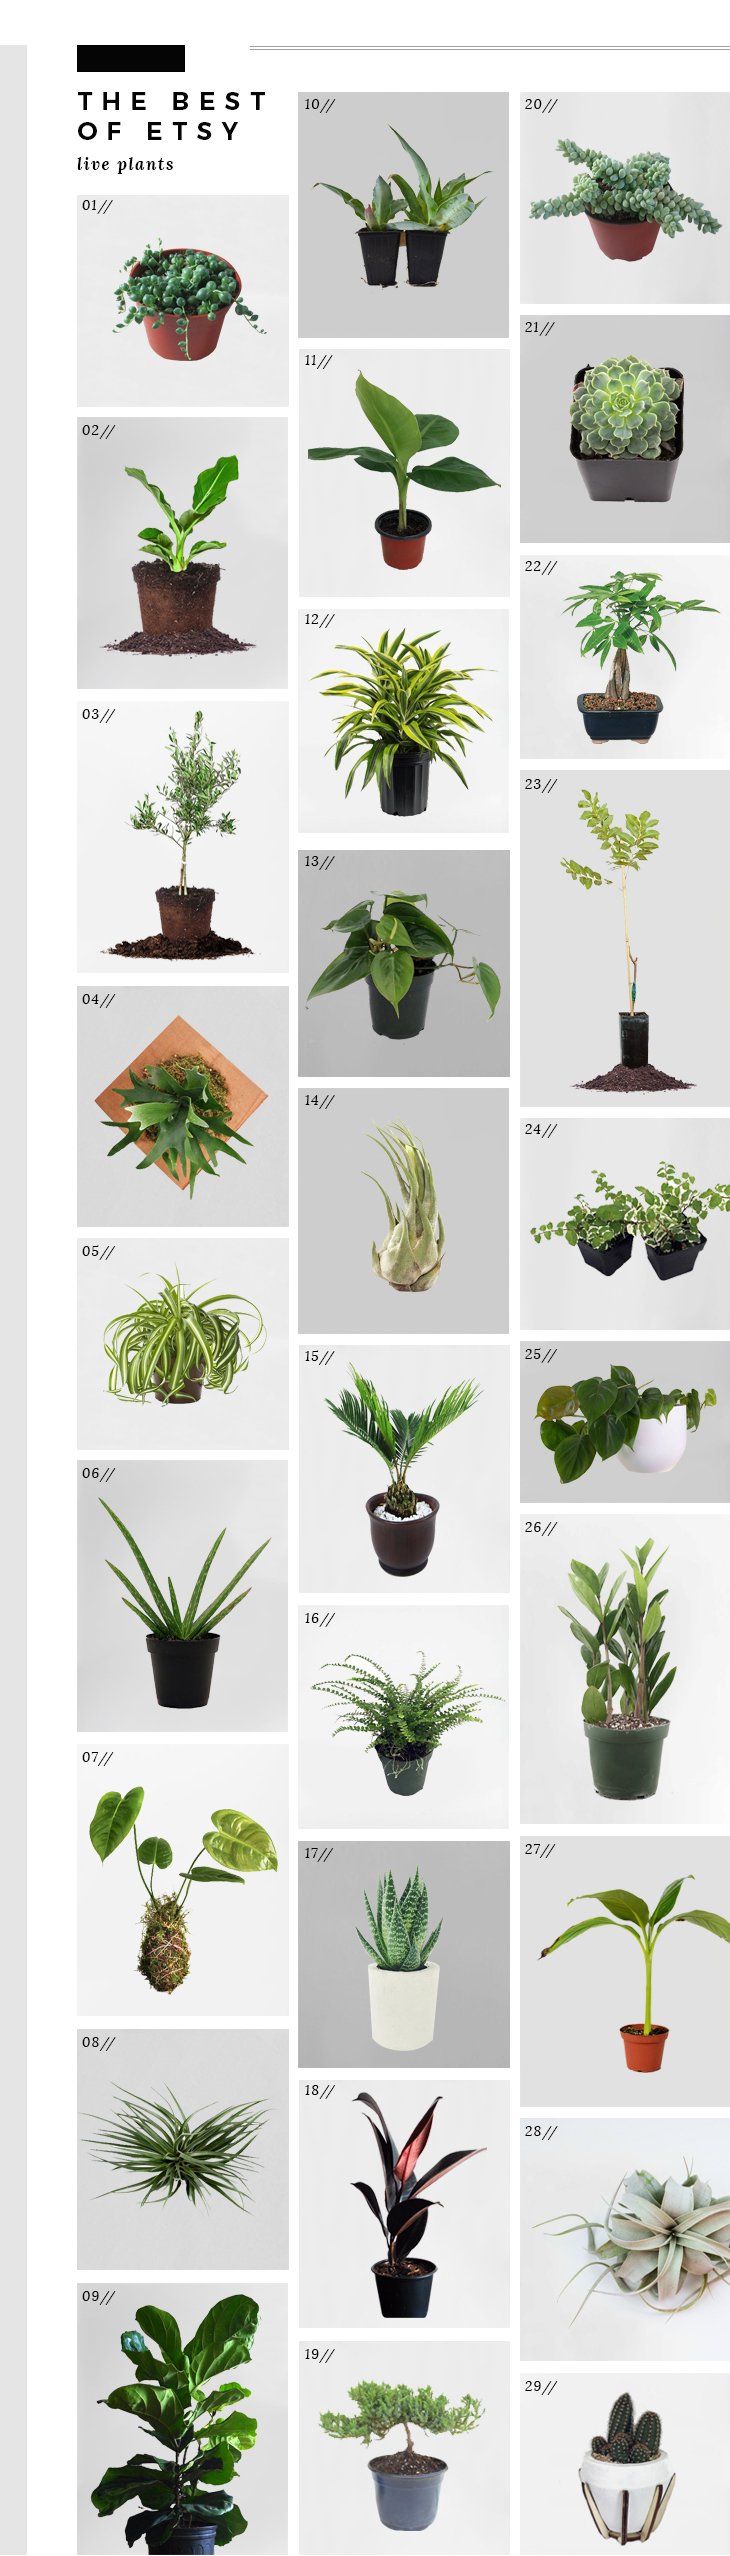 The Best of Etsy Live Plants